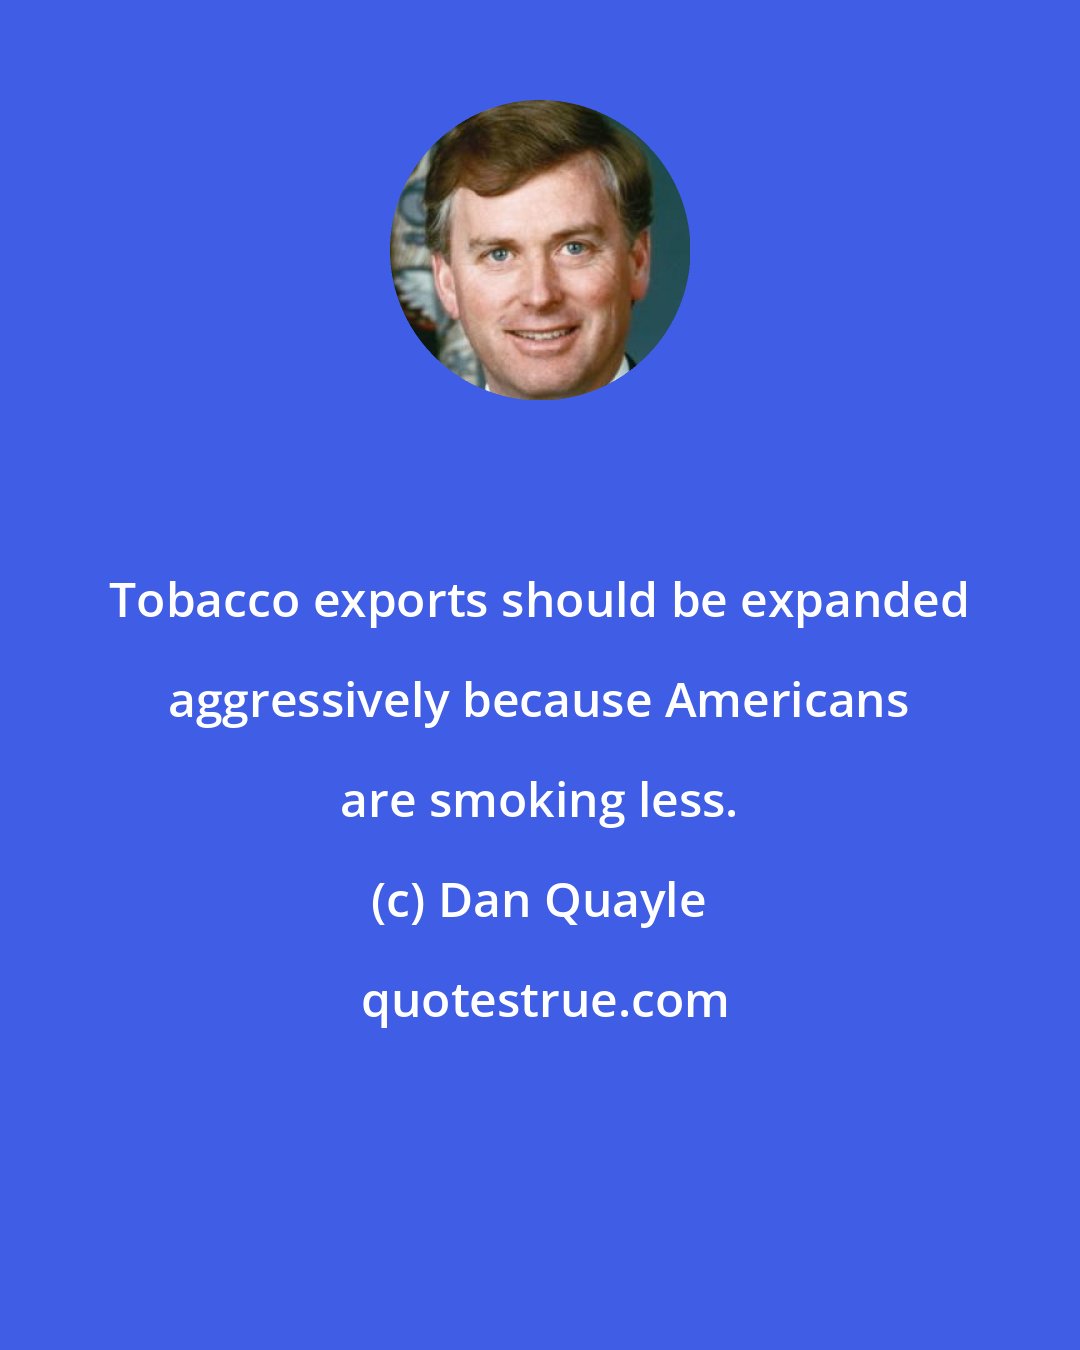 Dan Quayle: Tobacco exports should be expanded aggressively because Americans are smoking less.